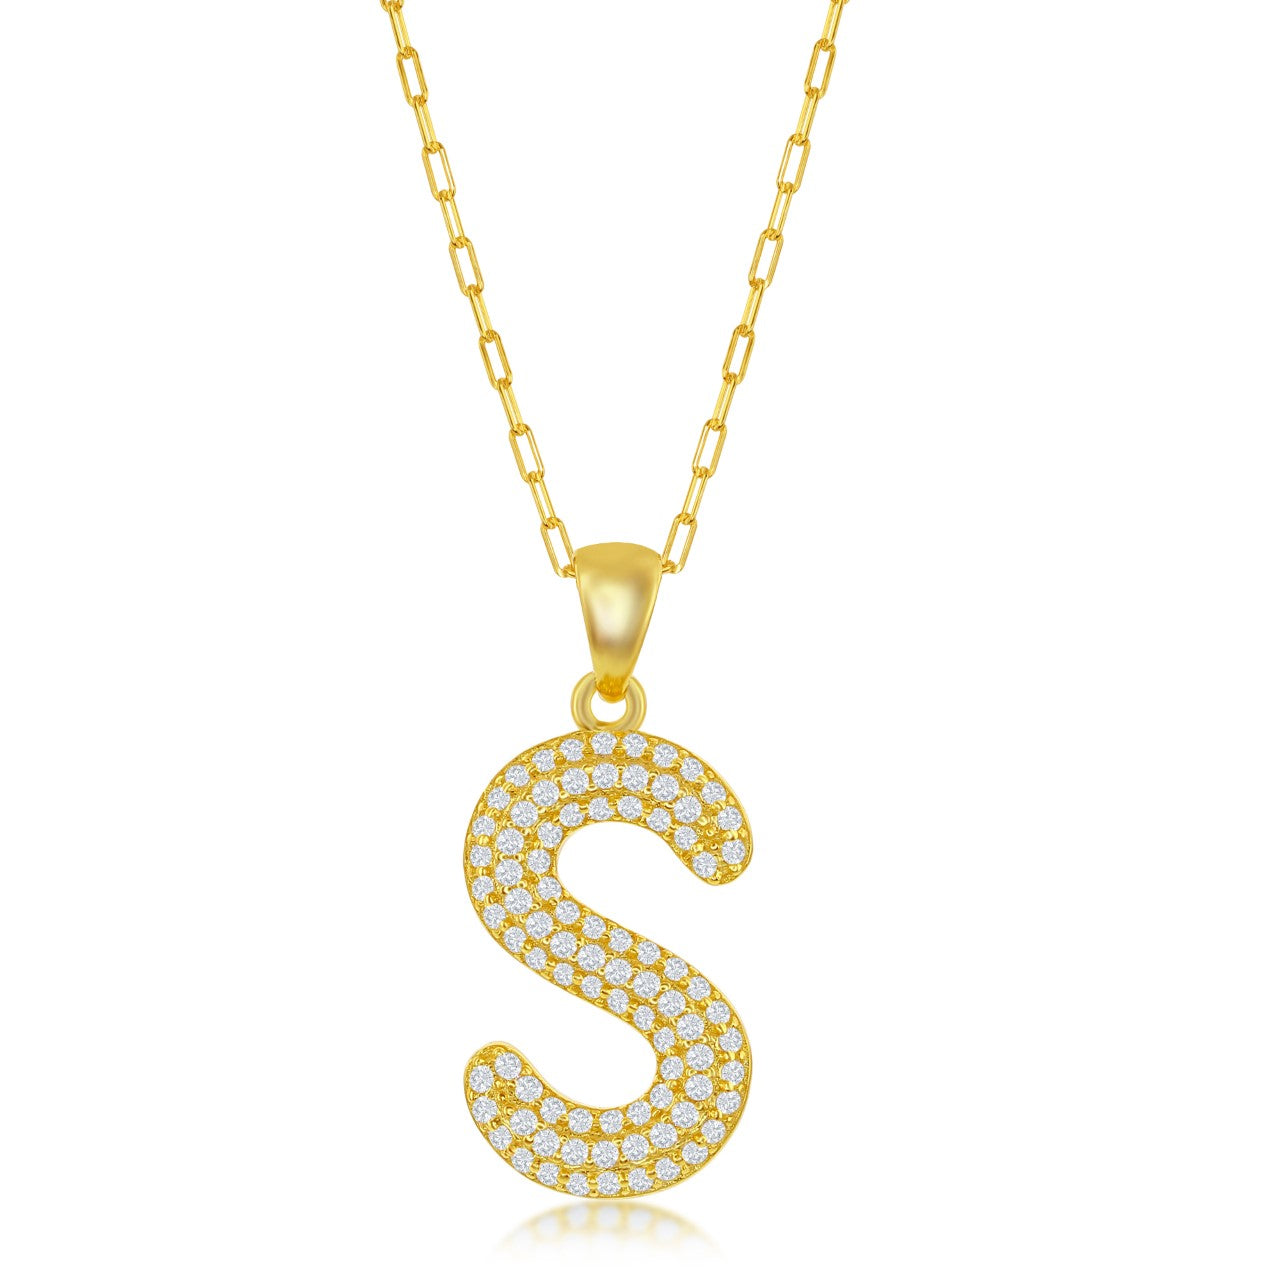 Jayelle CZ "Initial" Pendant Necklace - Gold Plated